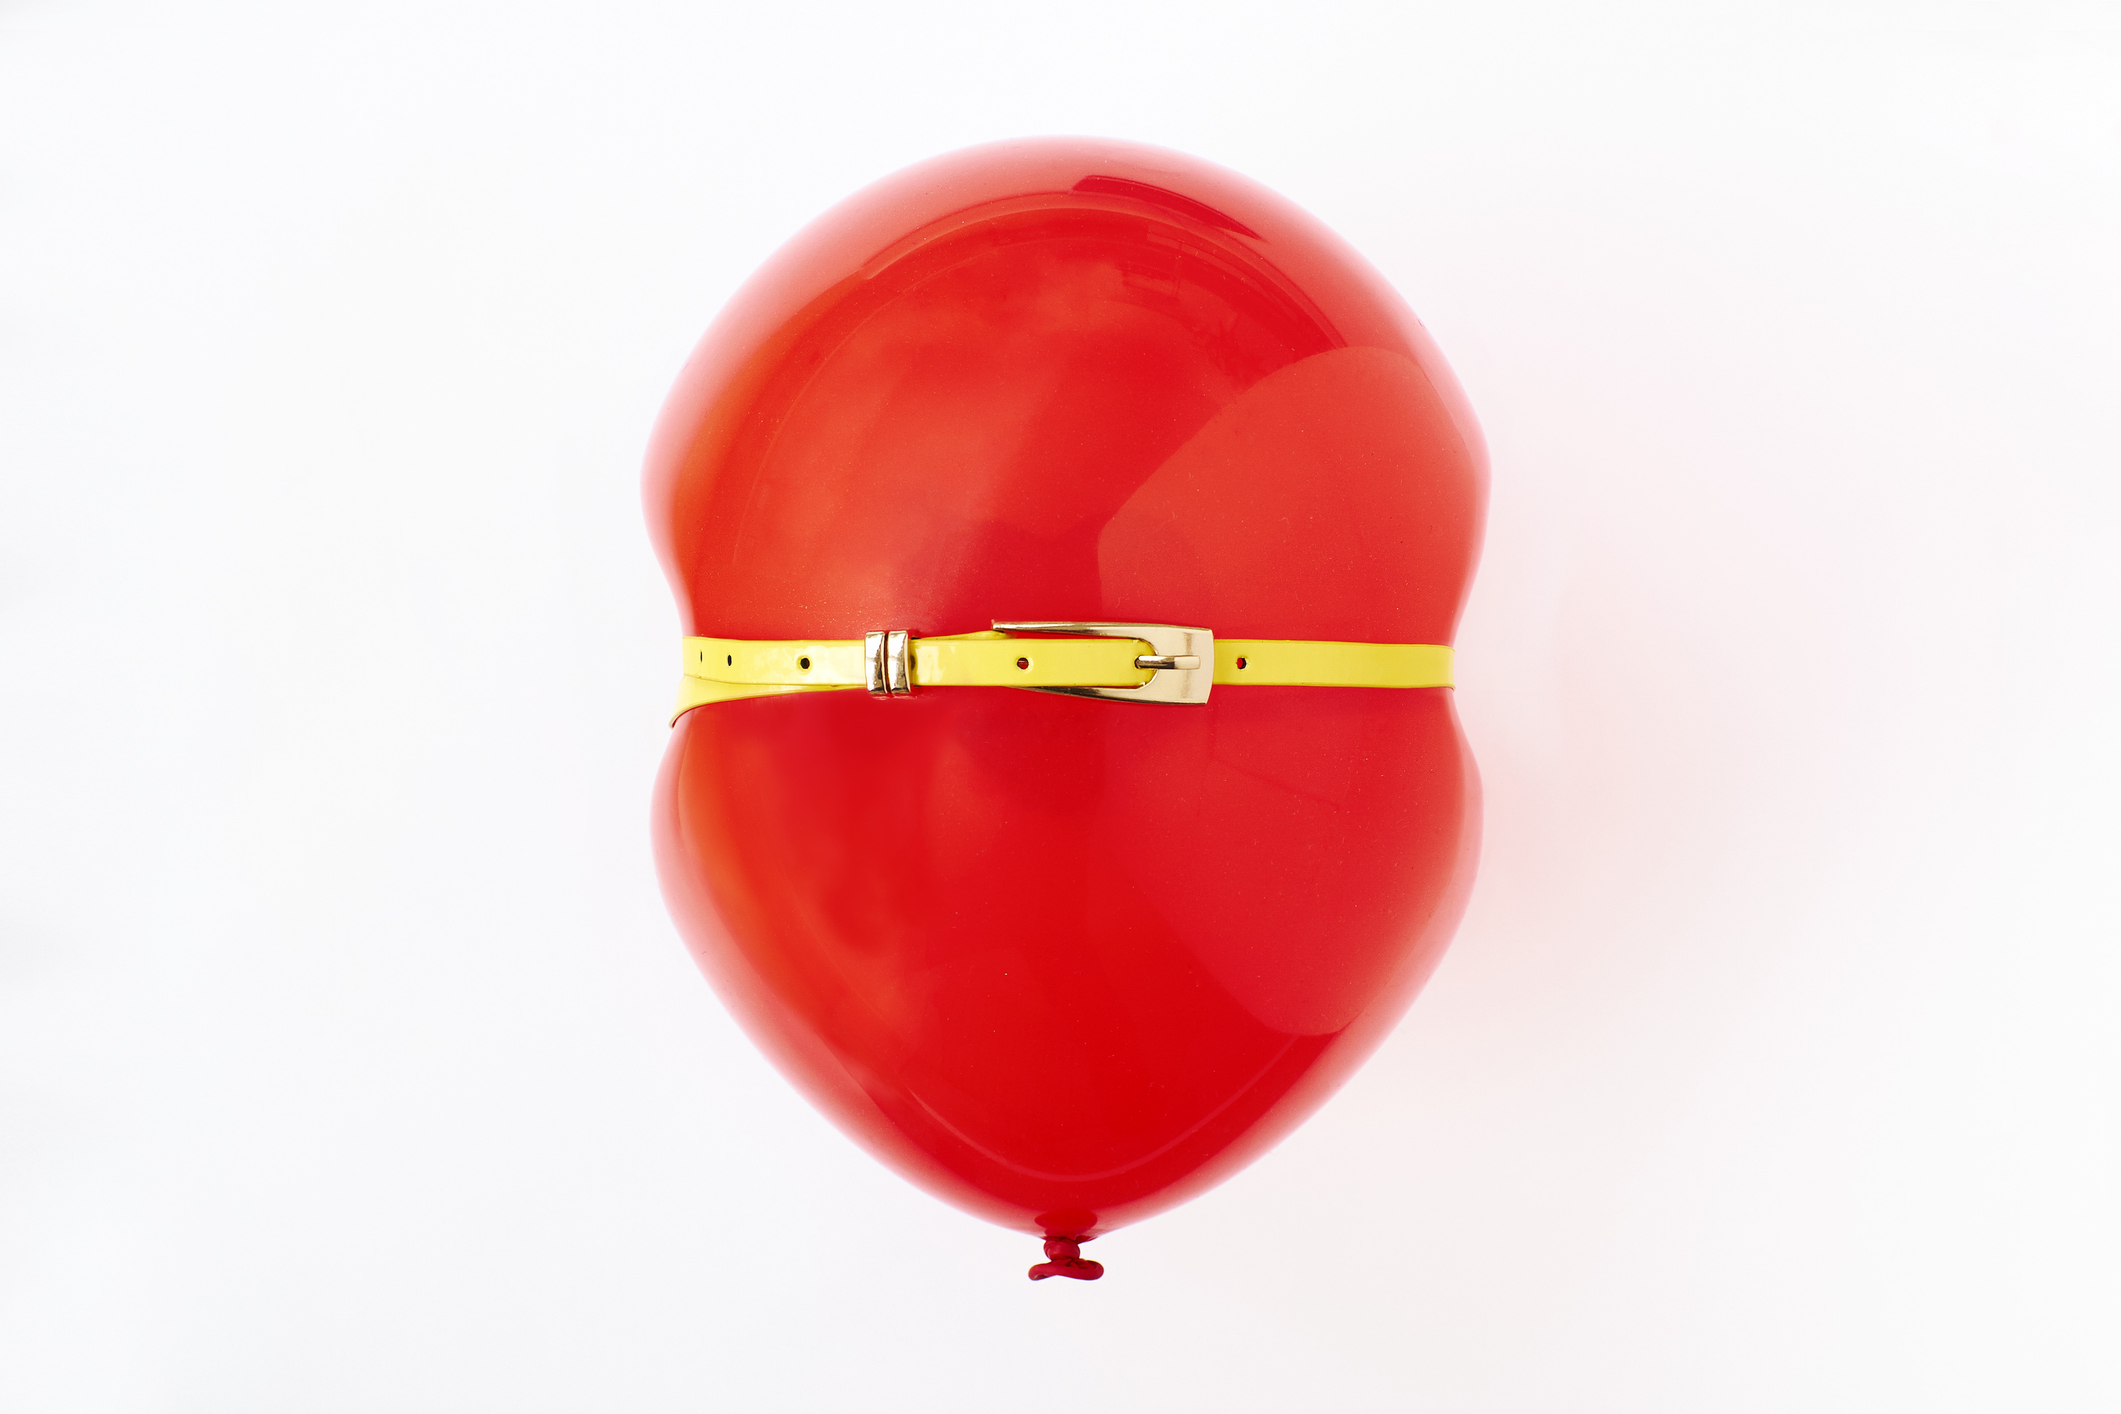 Red balloon, conceptual image of bloated stomach